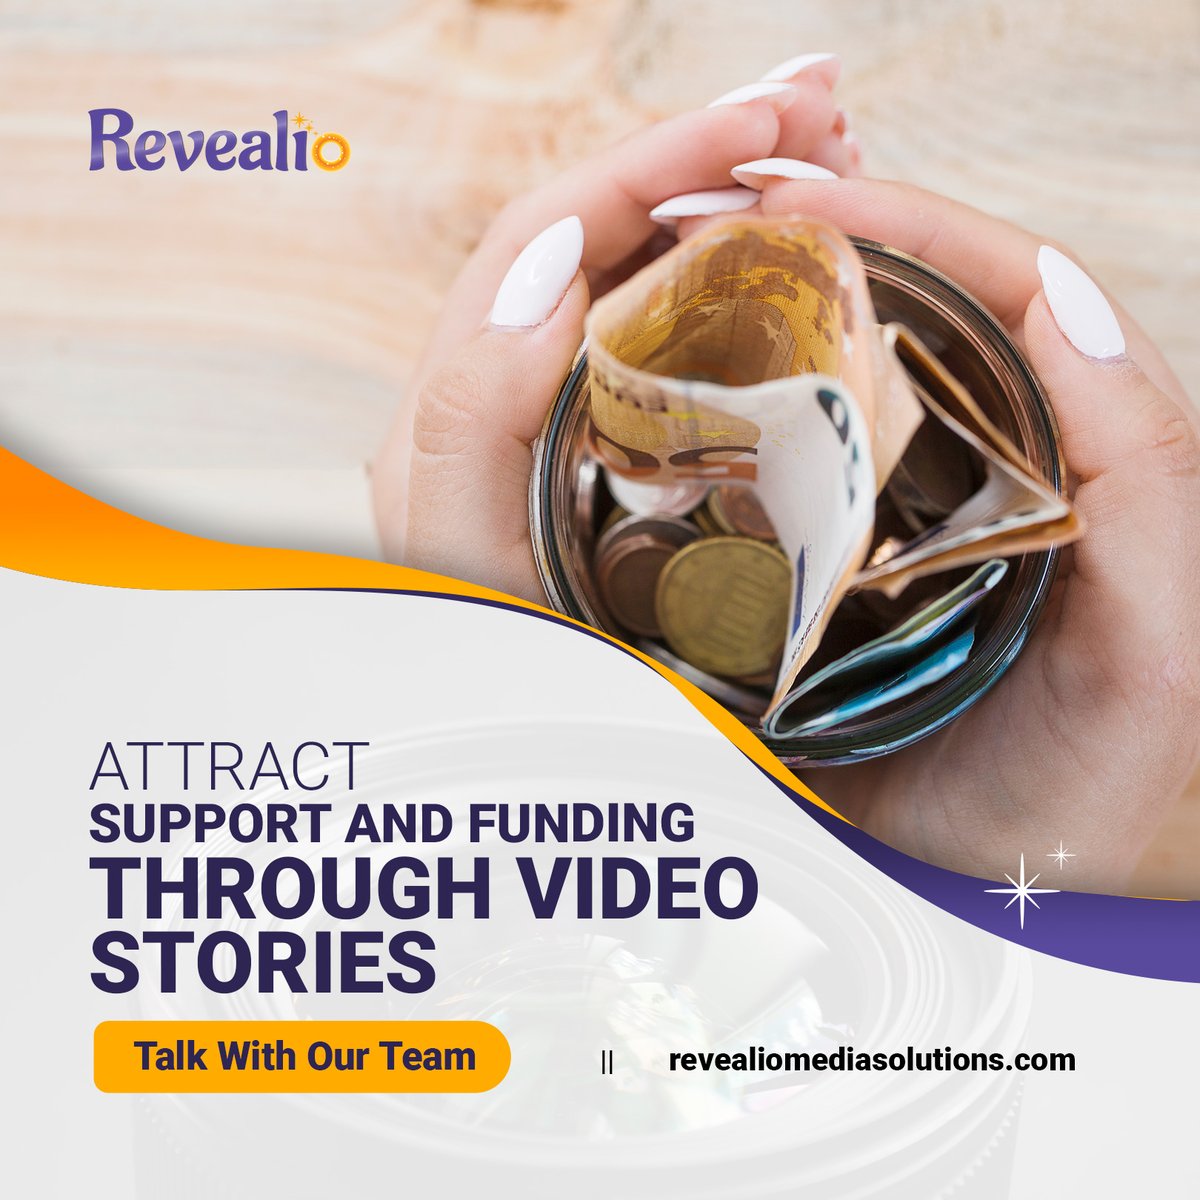 Get attention online and attract support through short form video storytelling. 

Contact us to get started!

#video #story #videostorytelling #smallbusinessvideo #nonprofitvideo #purposedriven #innovativestorytelling #revealio #uniquebusiness #storytelling #shortvideo